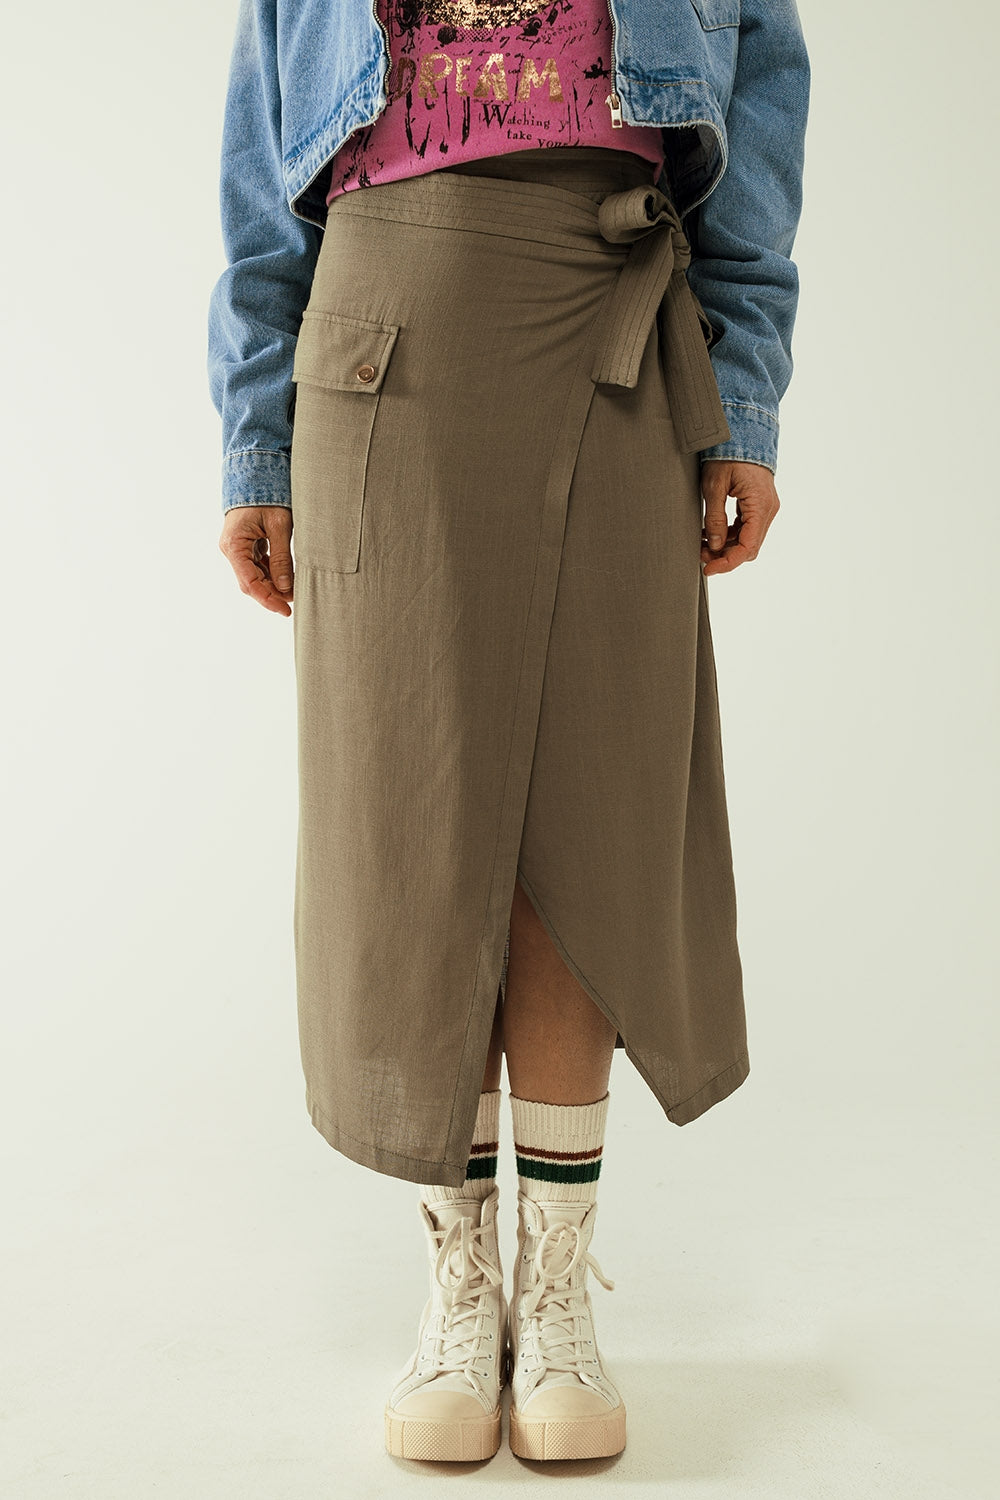 Q2 Khaki mid-length skirt with one pocket and a lace detail